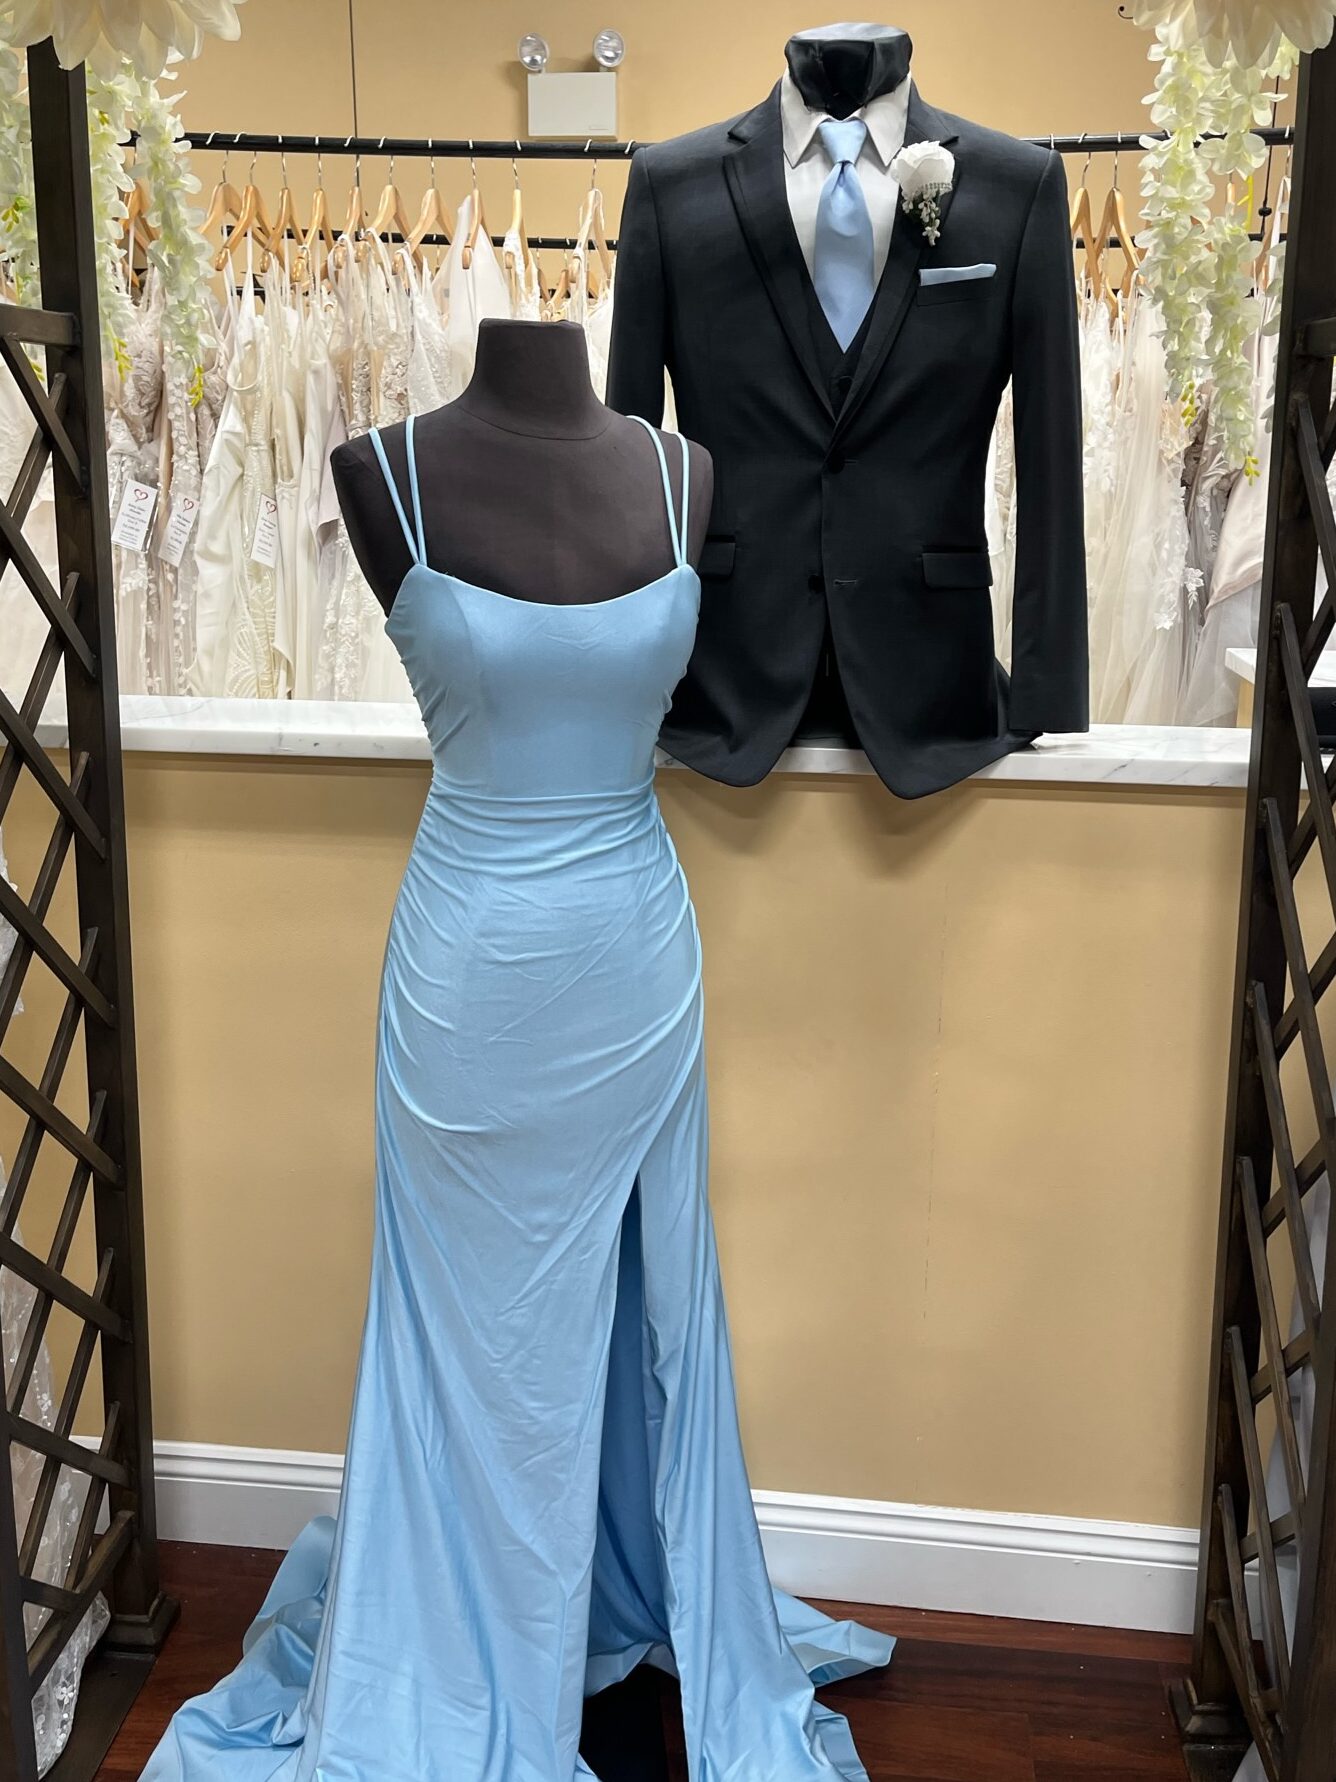 Sky blue bridesmaid dress and tuxedo with matching long sky blue tie, and pocket square